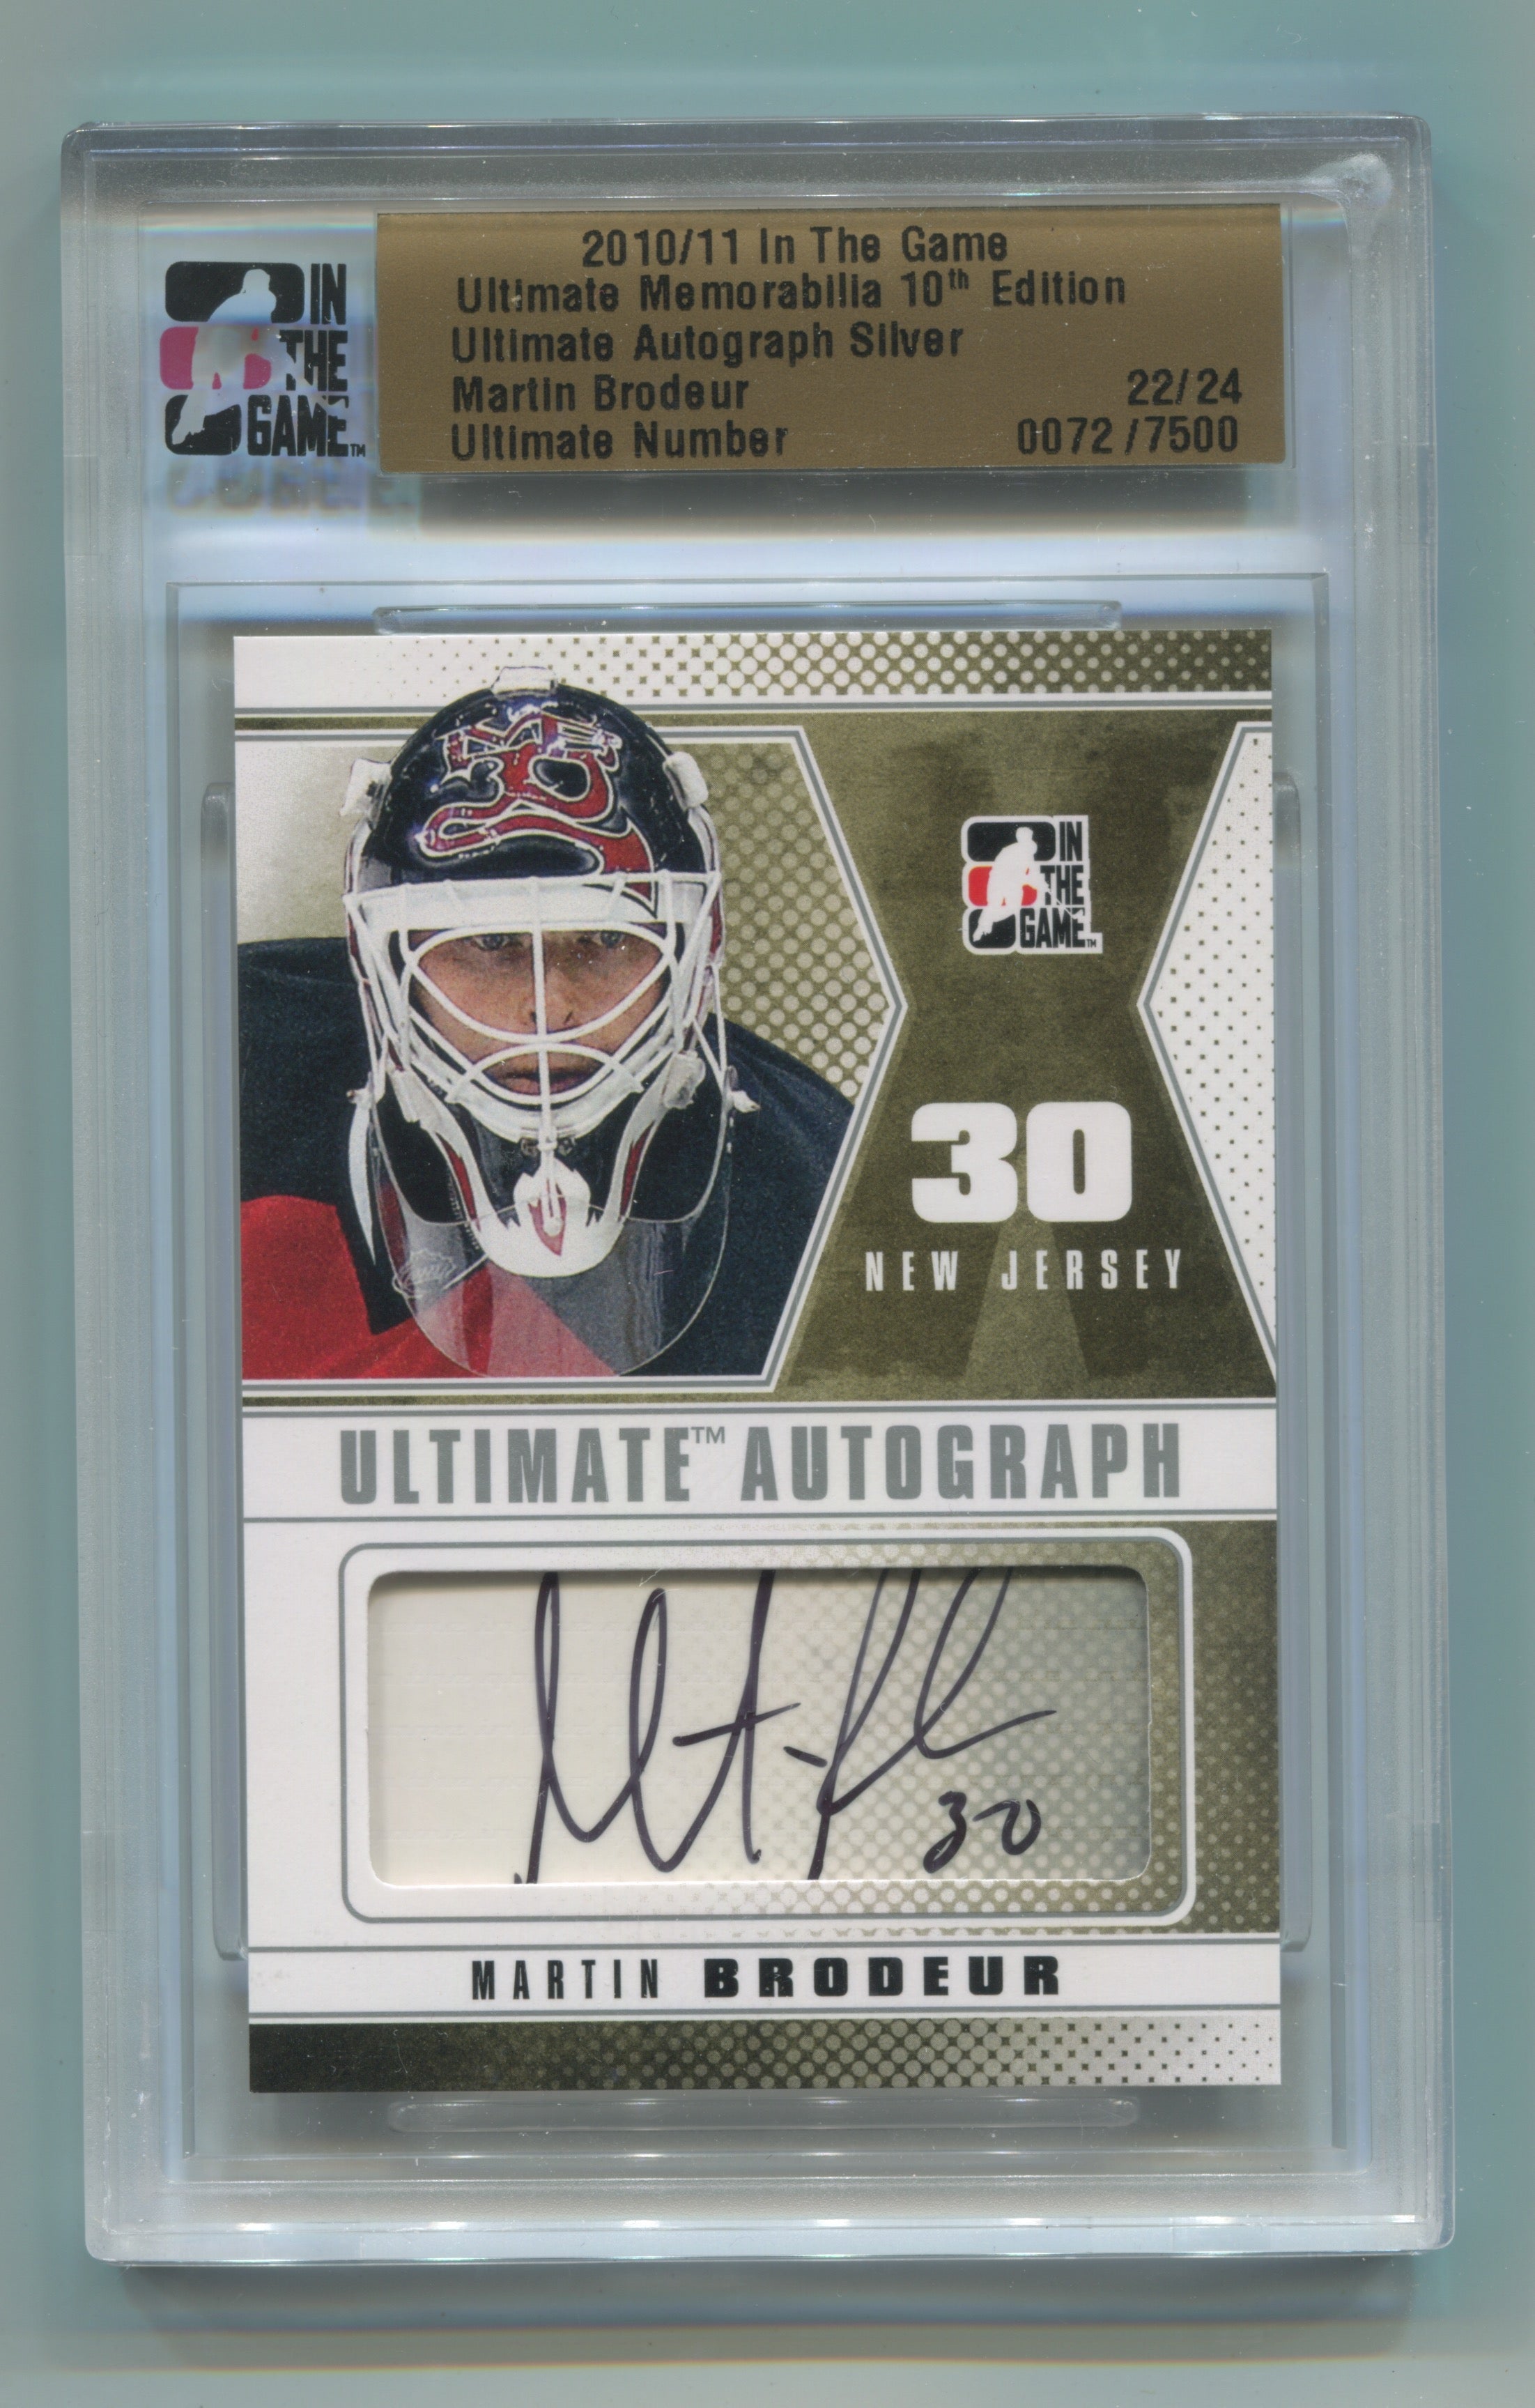 2010-11 ITG Ultimate Memorabilia 10th Edition Autographs Silver Martin Brodeur #22/24 | Eastridge Sports Cards